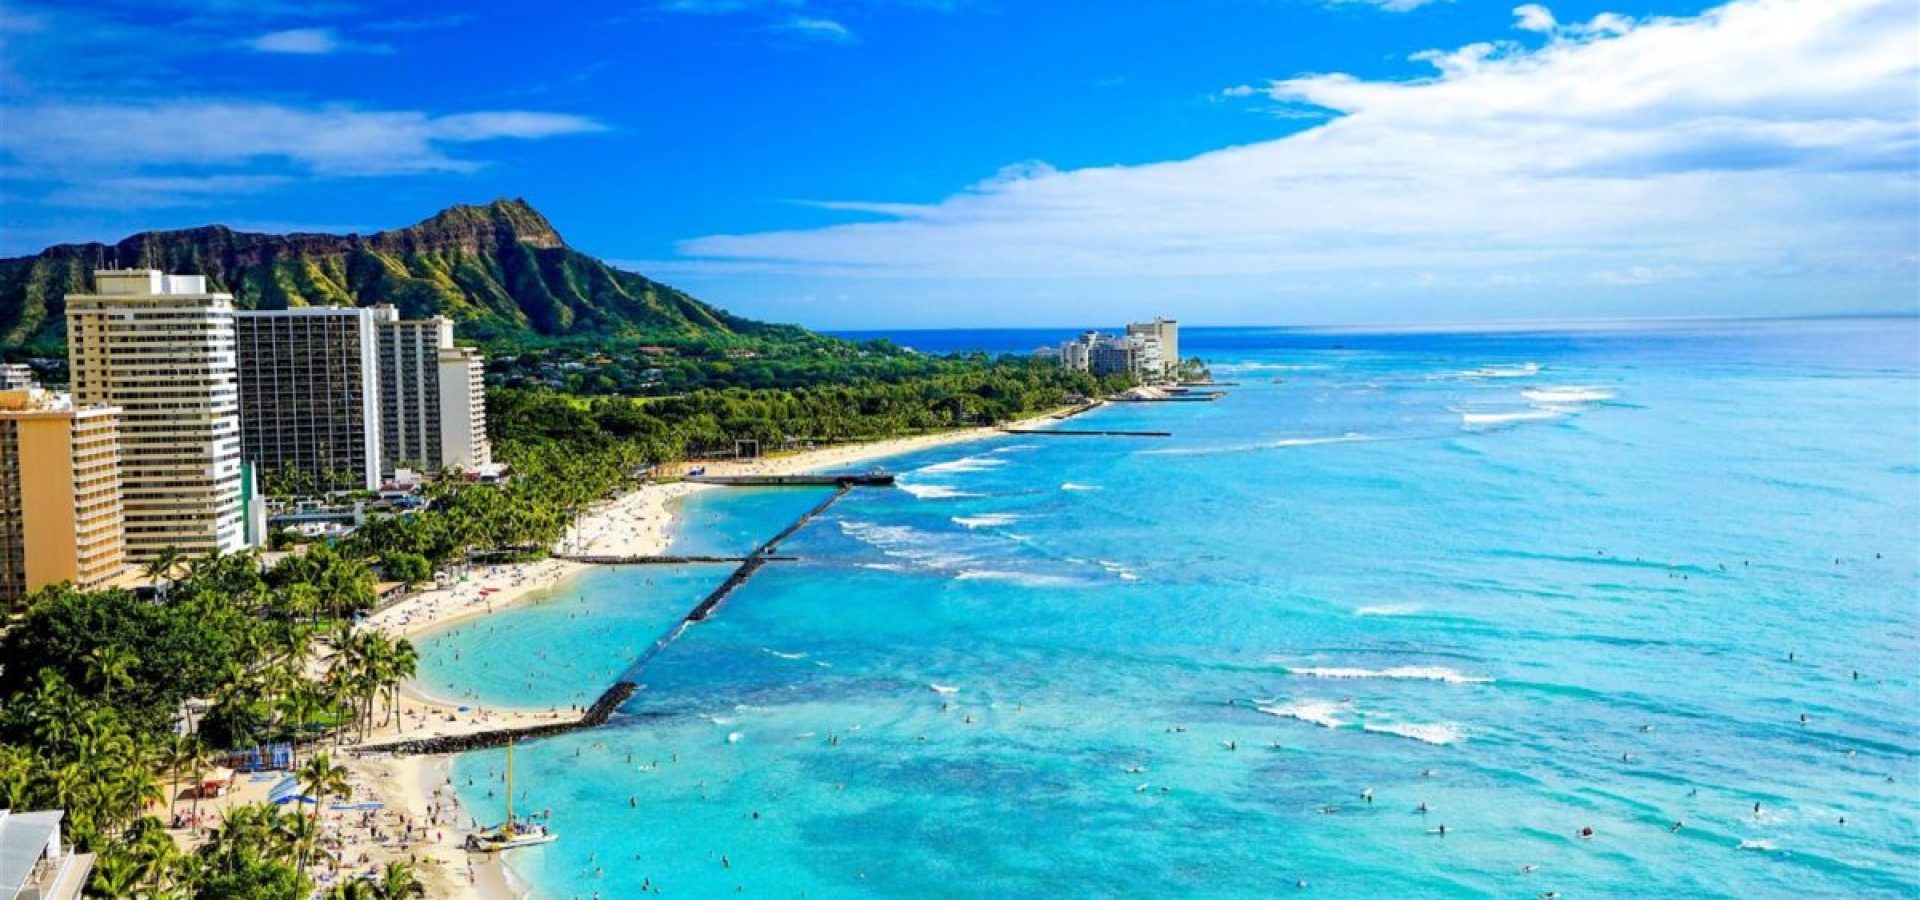 The State of Hawaii and cryptocurrencies